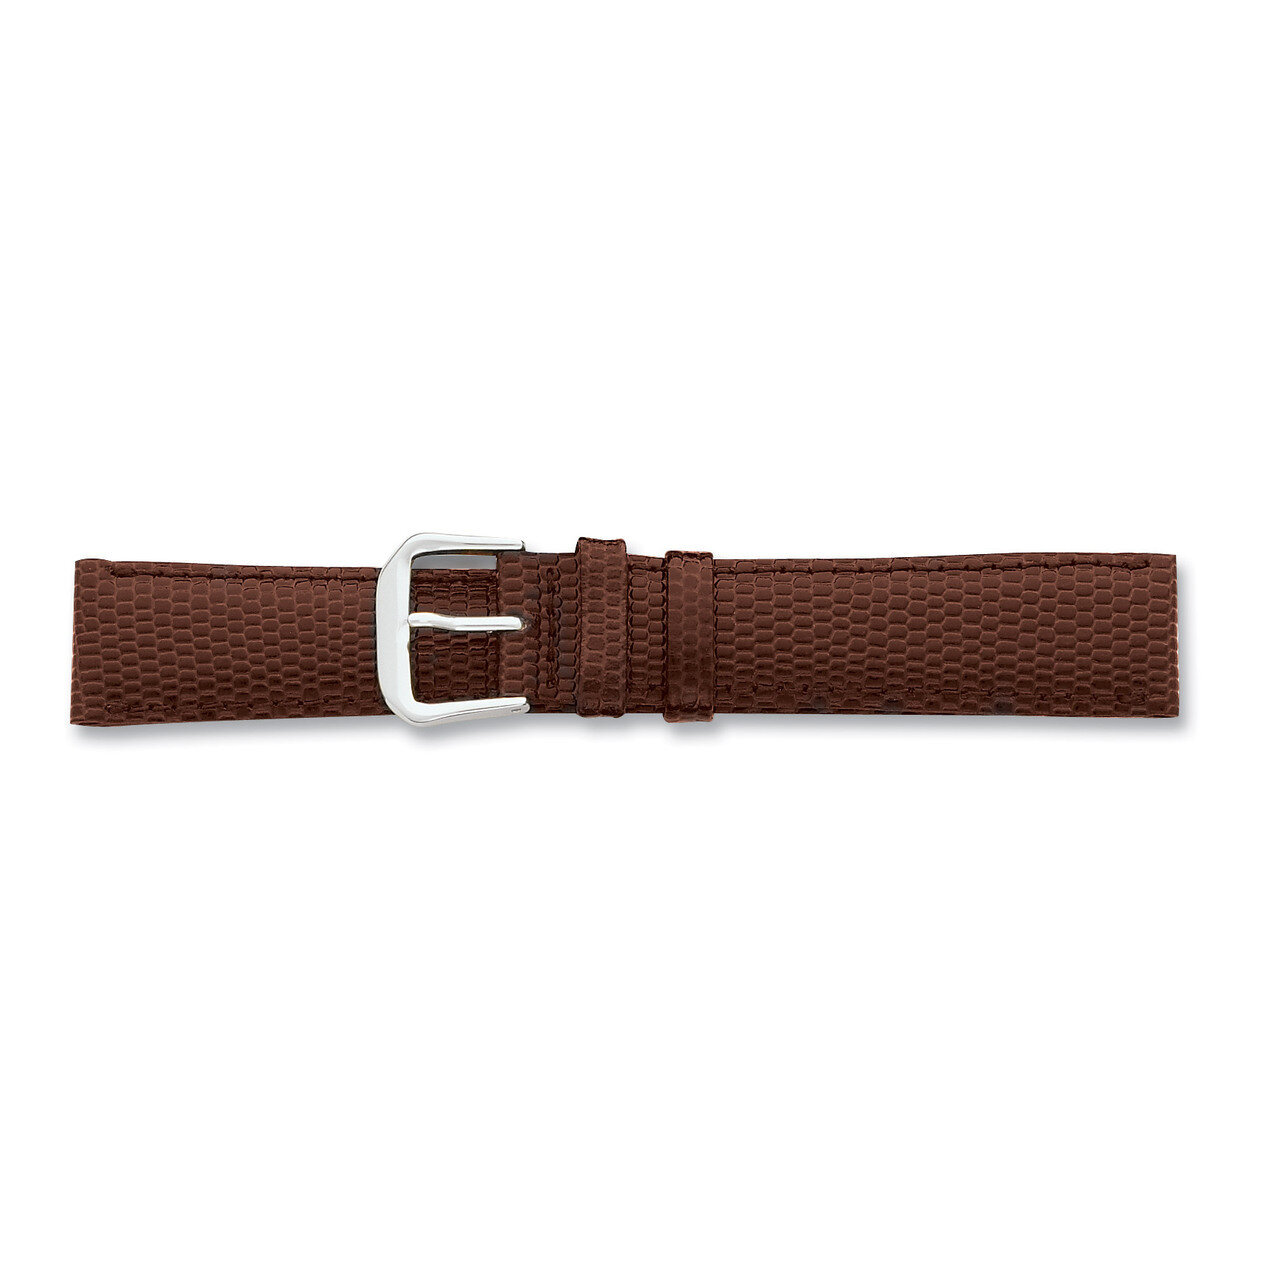 14mm Brown Lizard Grain Leather Watch Band 6.75 Inch Silver-tone Buckle BAW16-14